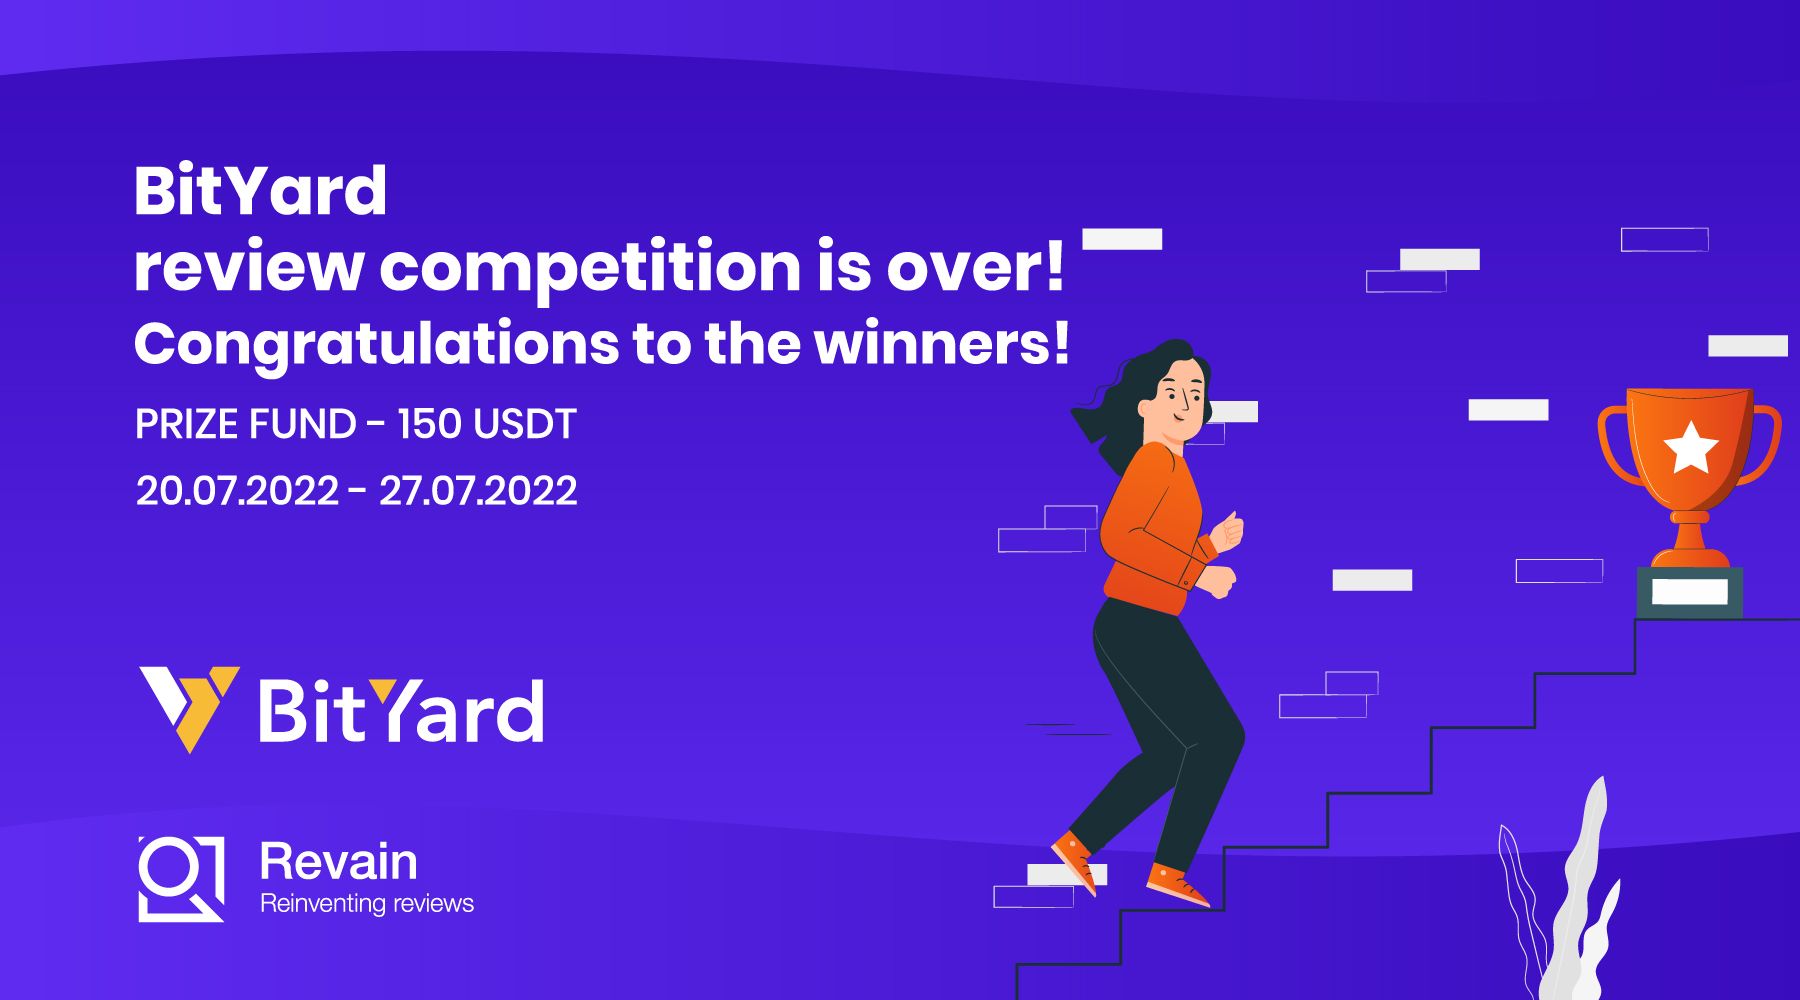 BitYard review competition is over! Congratulations to the winners! 